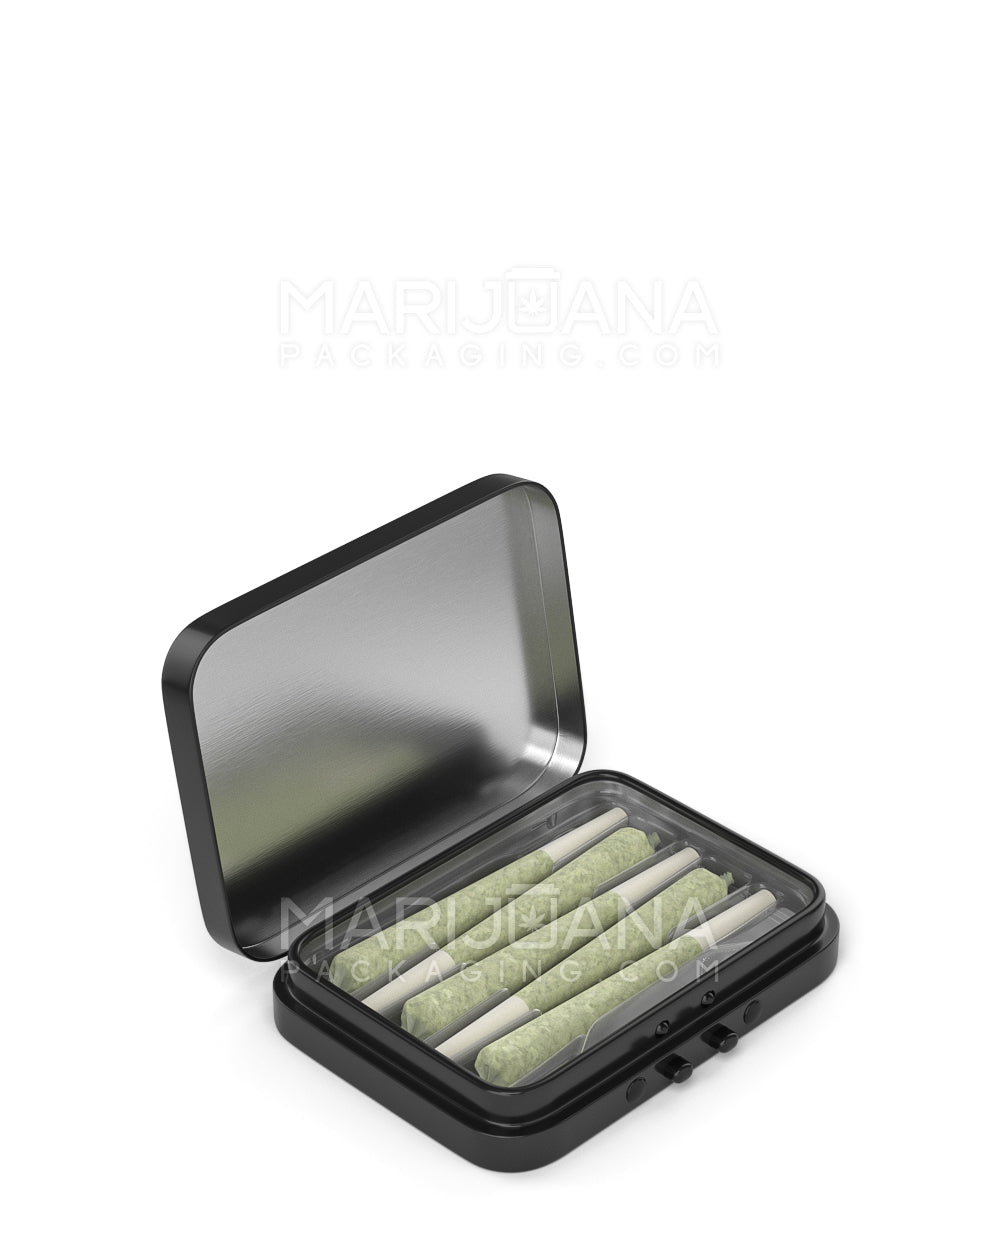 Edible & Joint Box Insert Tray for 5 Mini Pre Rolled Cones | 70mm - Clear Plastic - 100 Count - 8